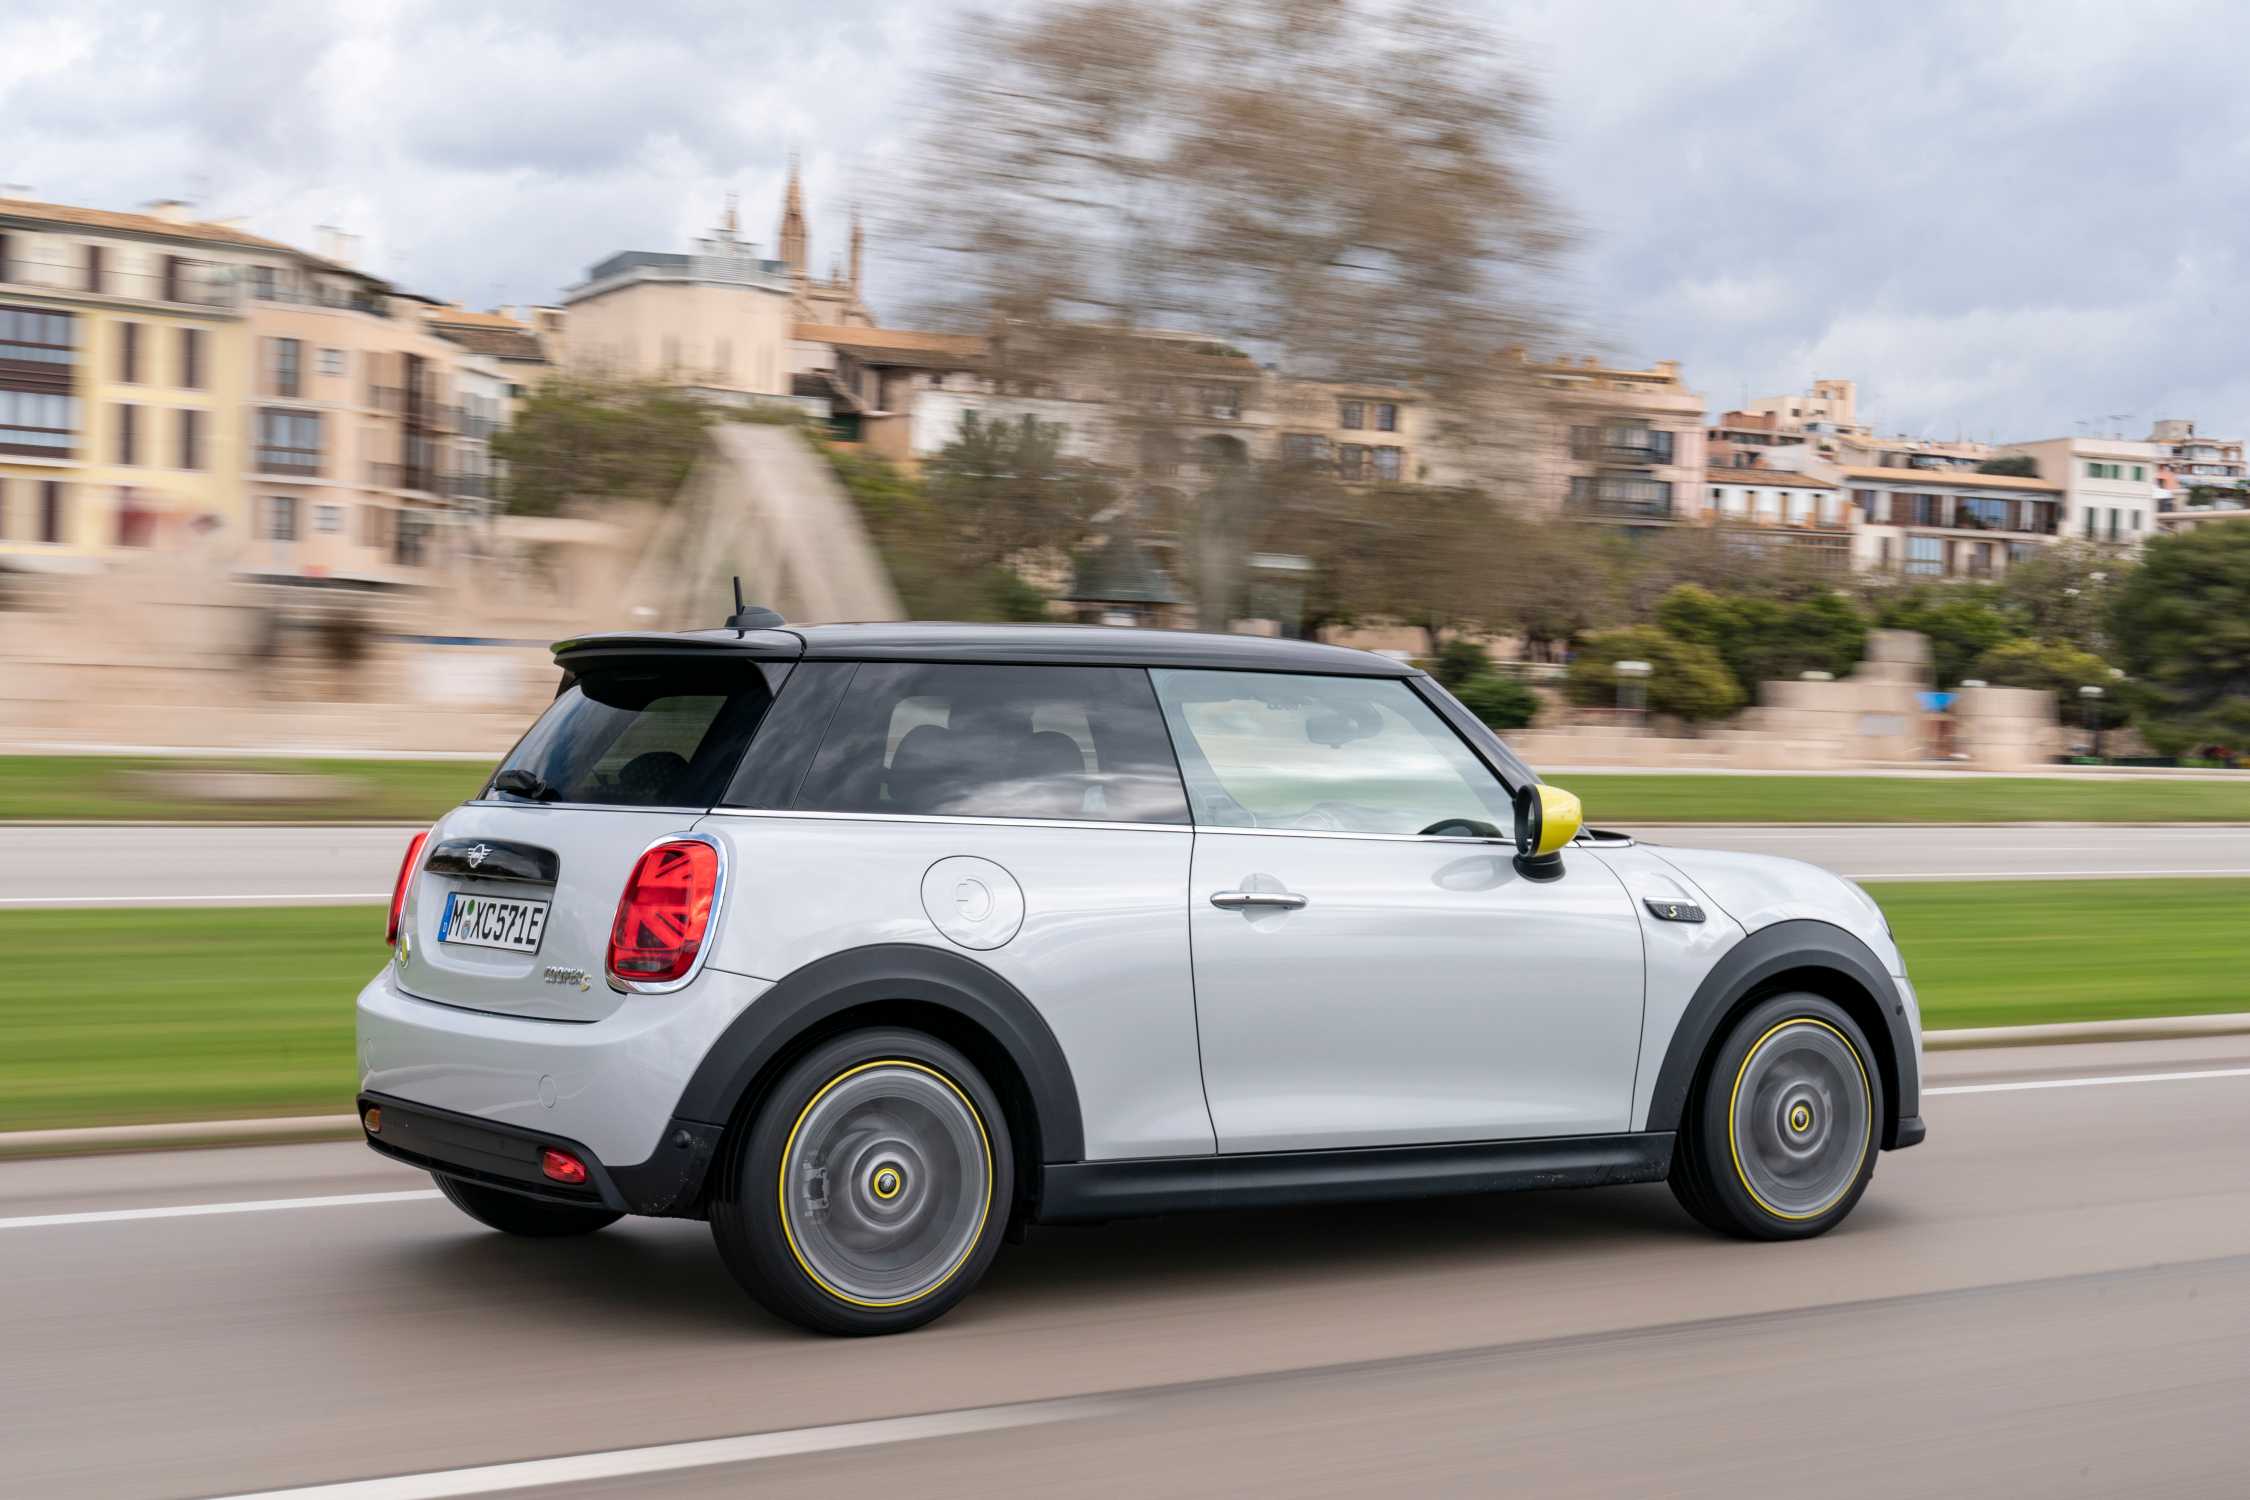 NEW CONSUMER SURVEY FROM MINI USA SHOWS MORE AMERICANS VIEW ELECTRIC ...